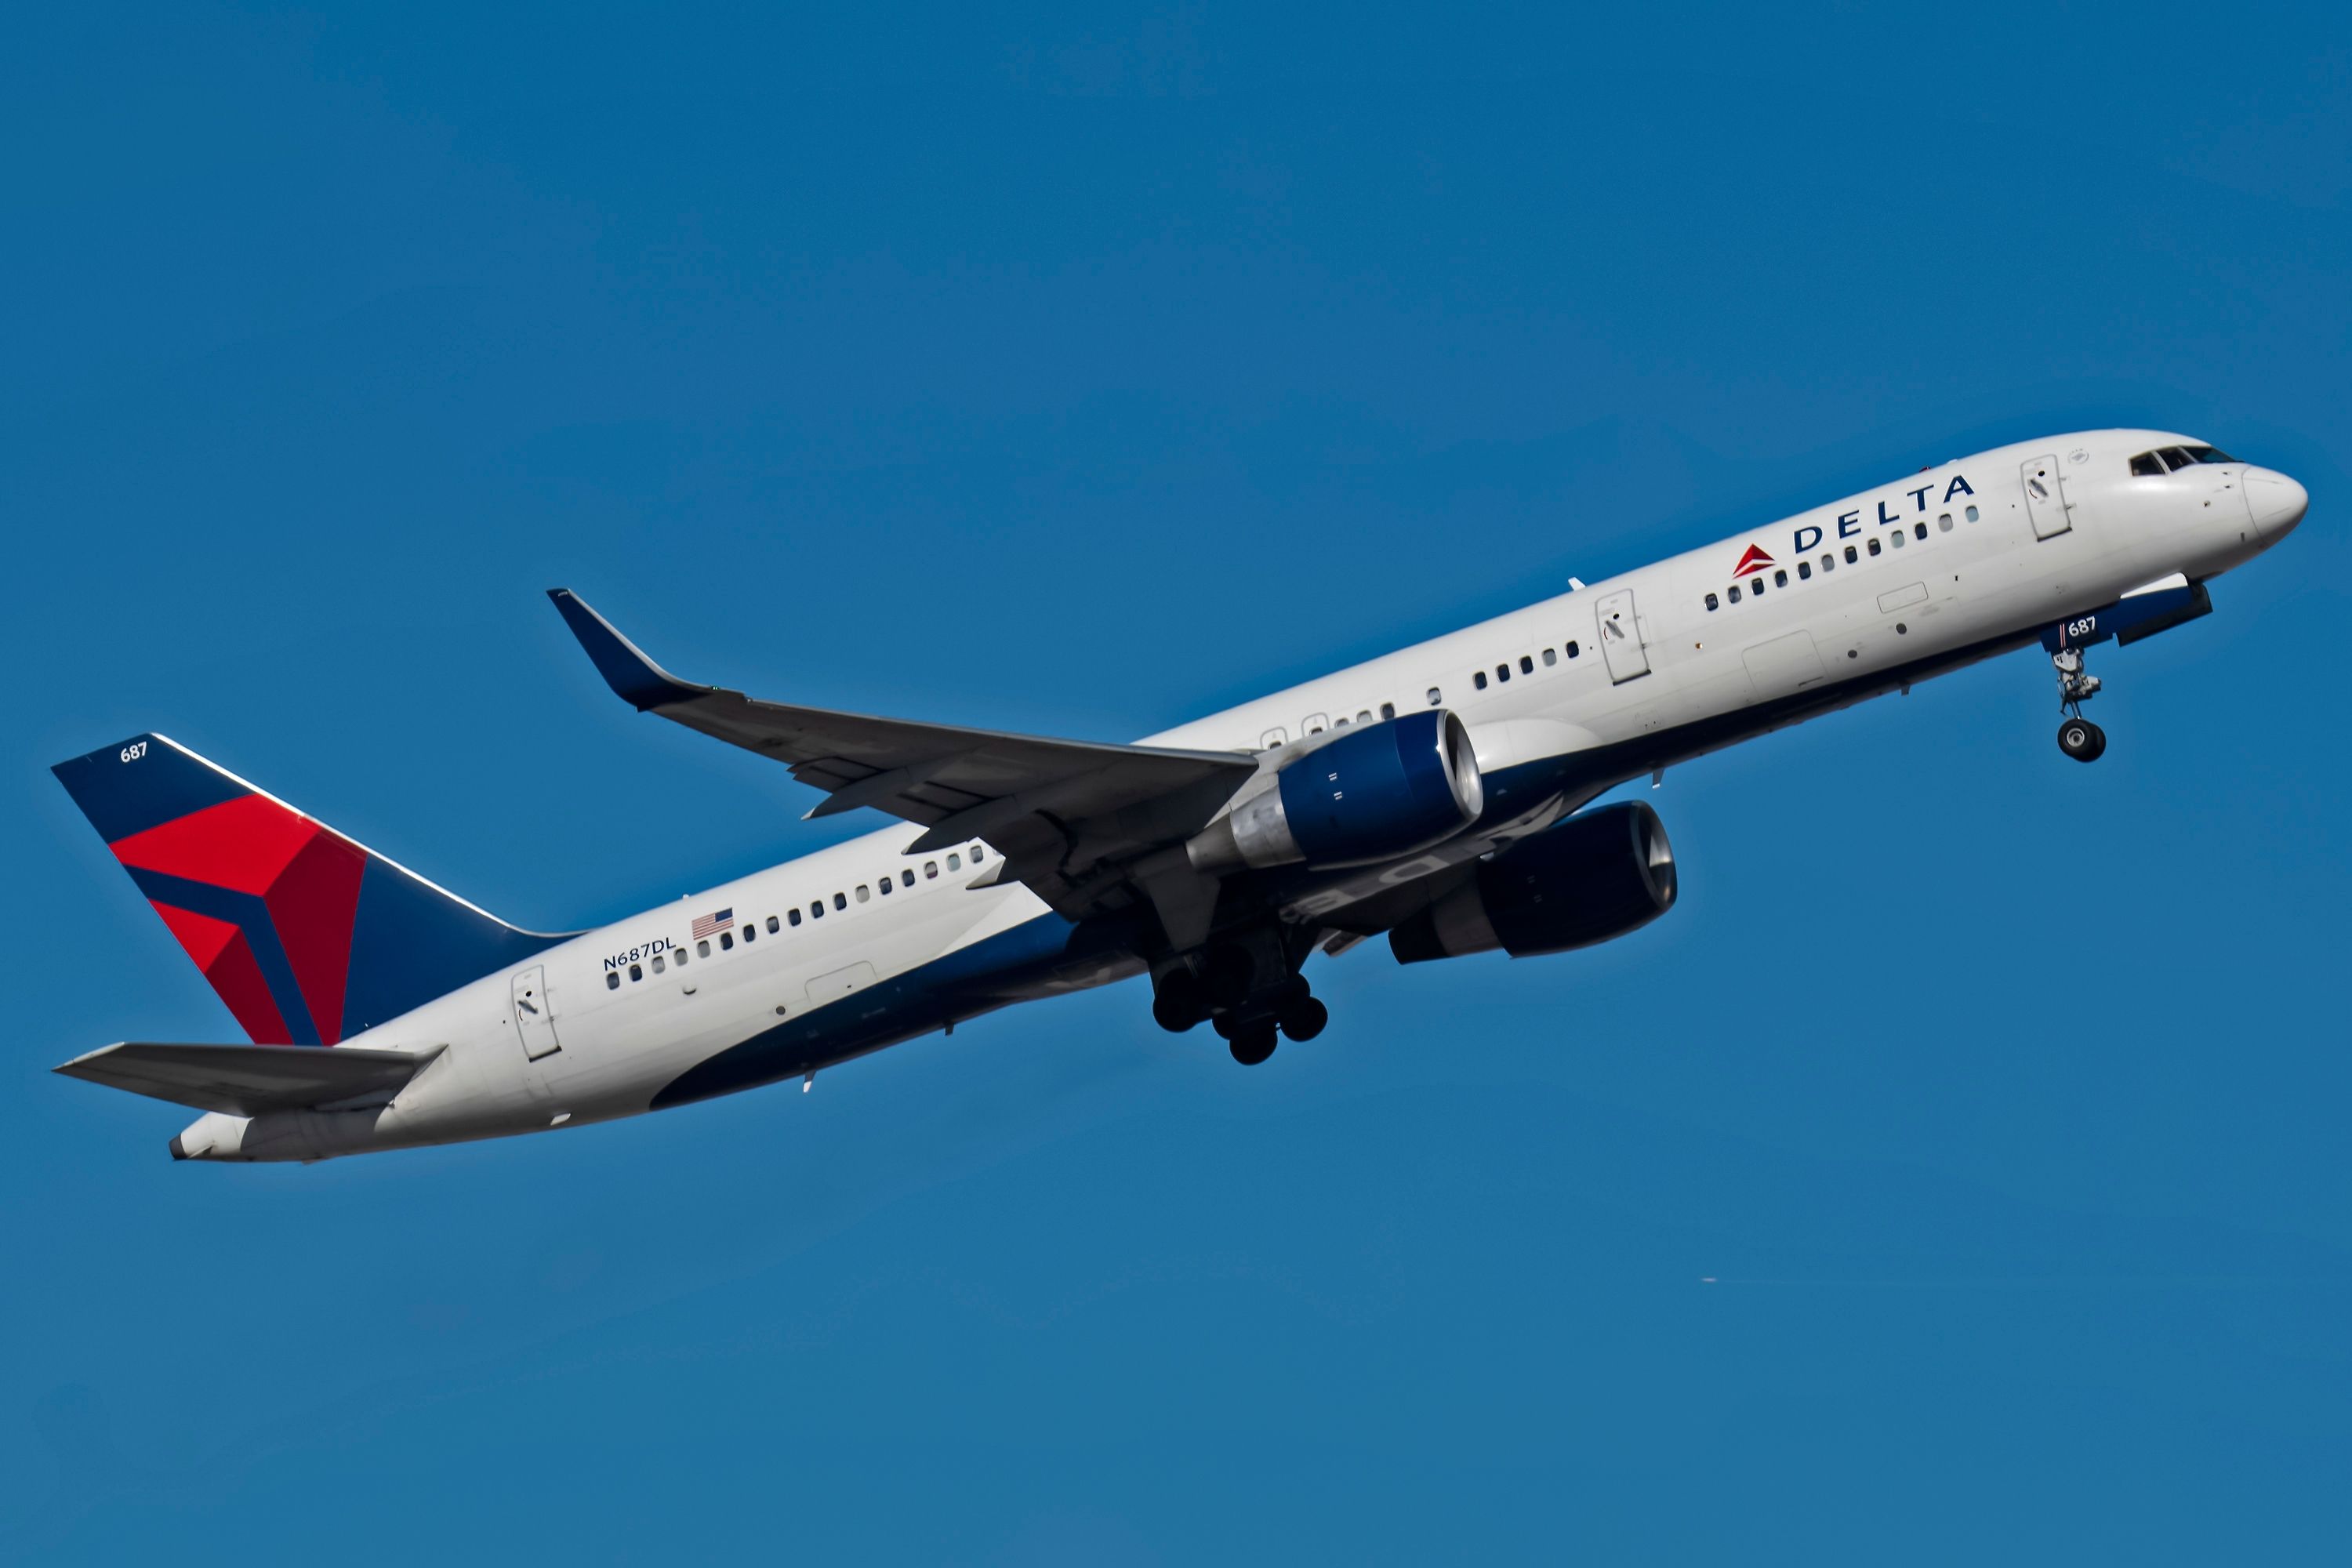 A Delta Air Lines Boeing 757-200 flying in the sky.